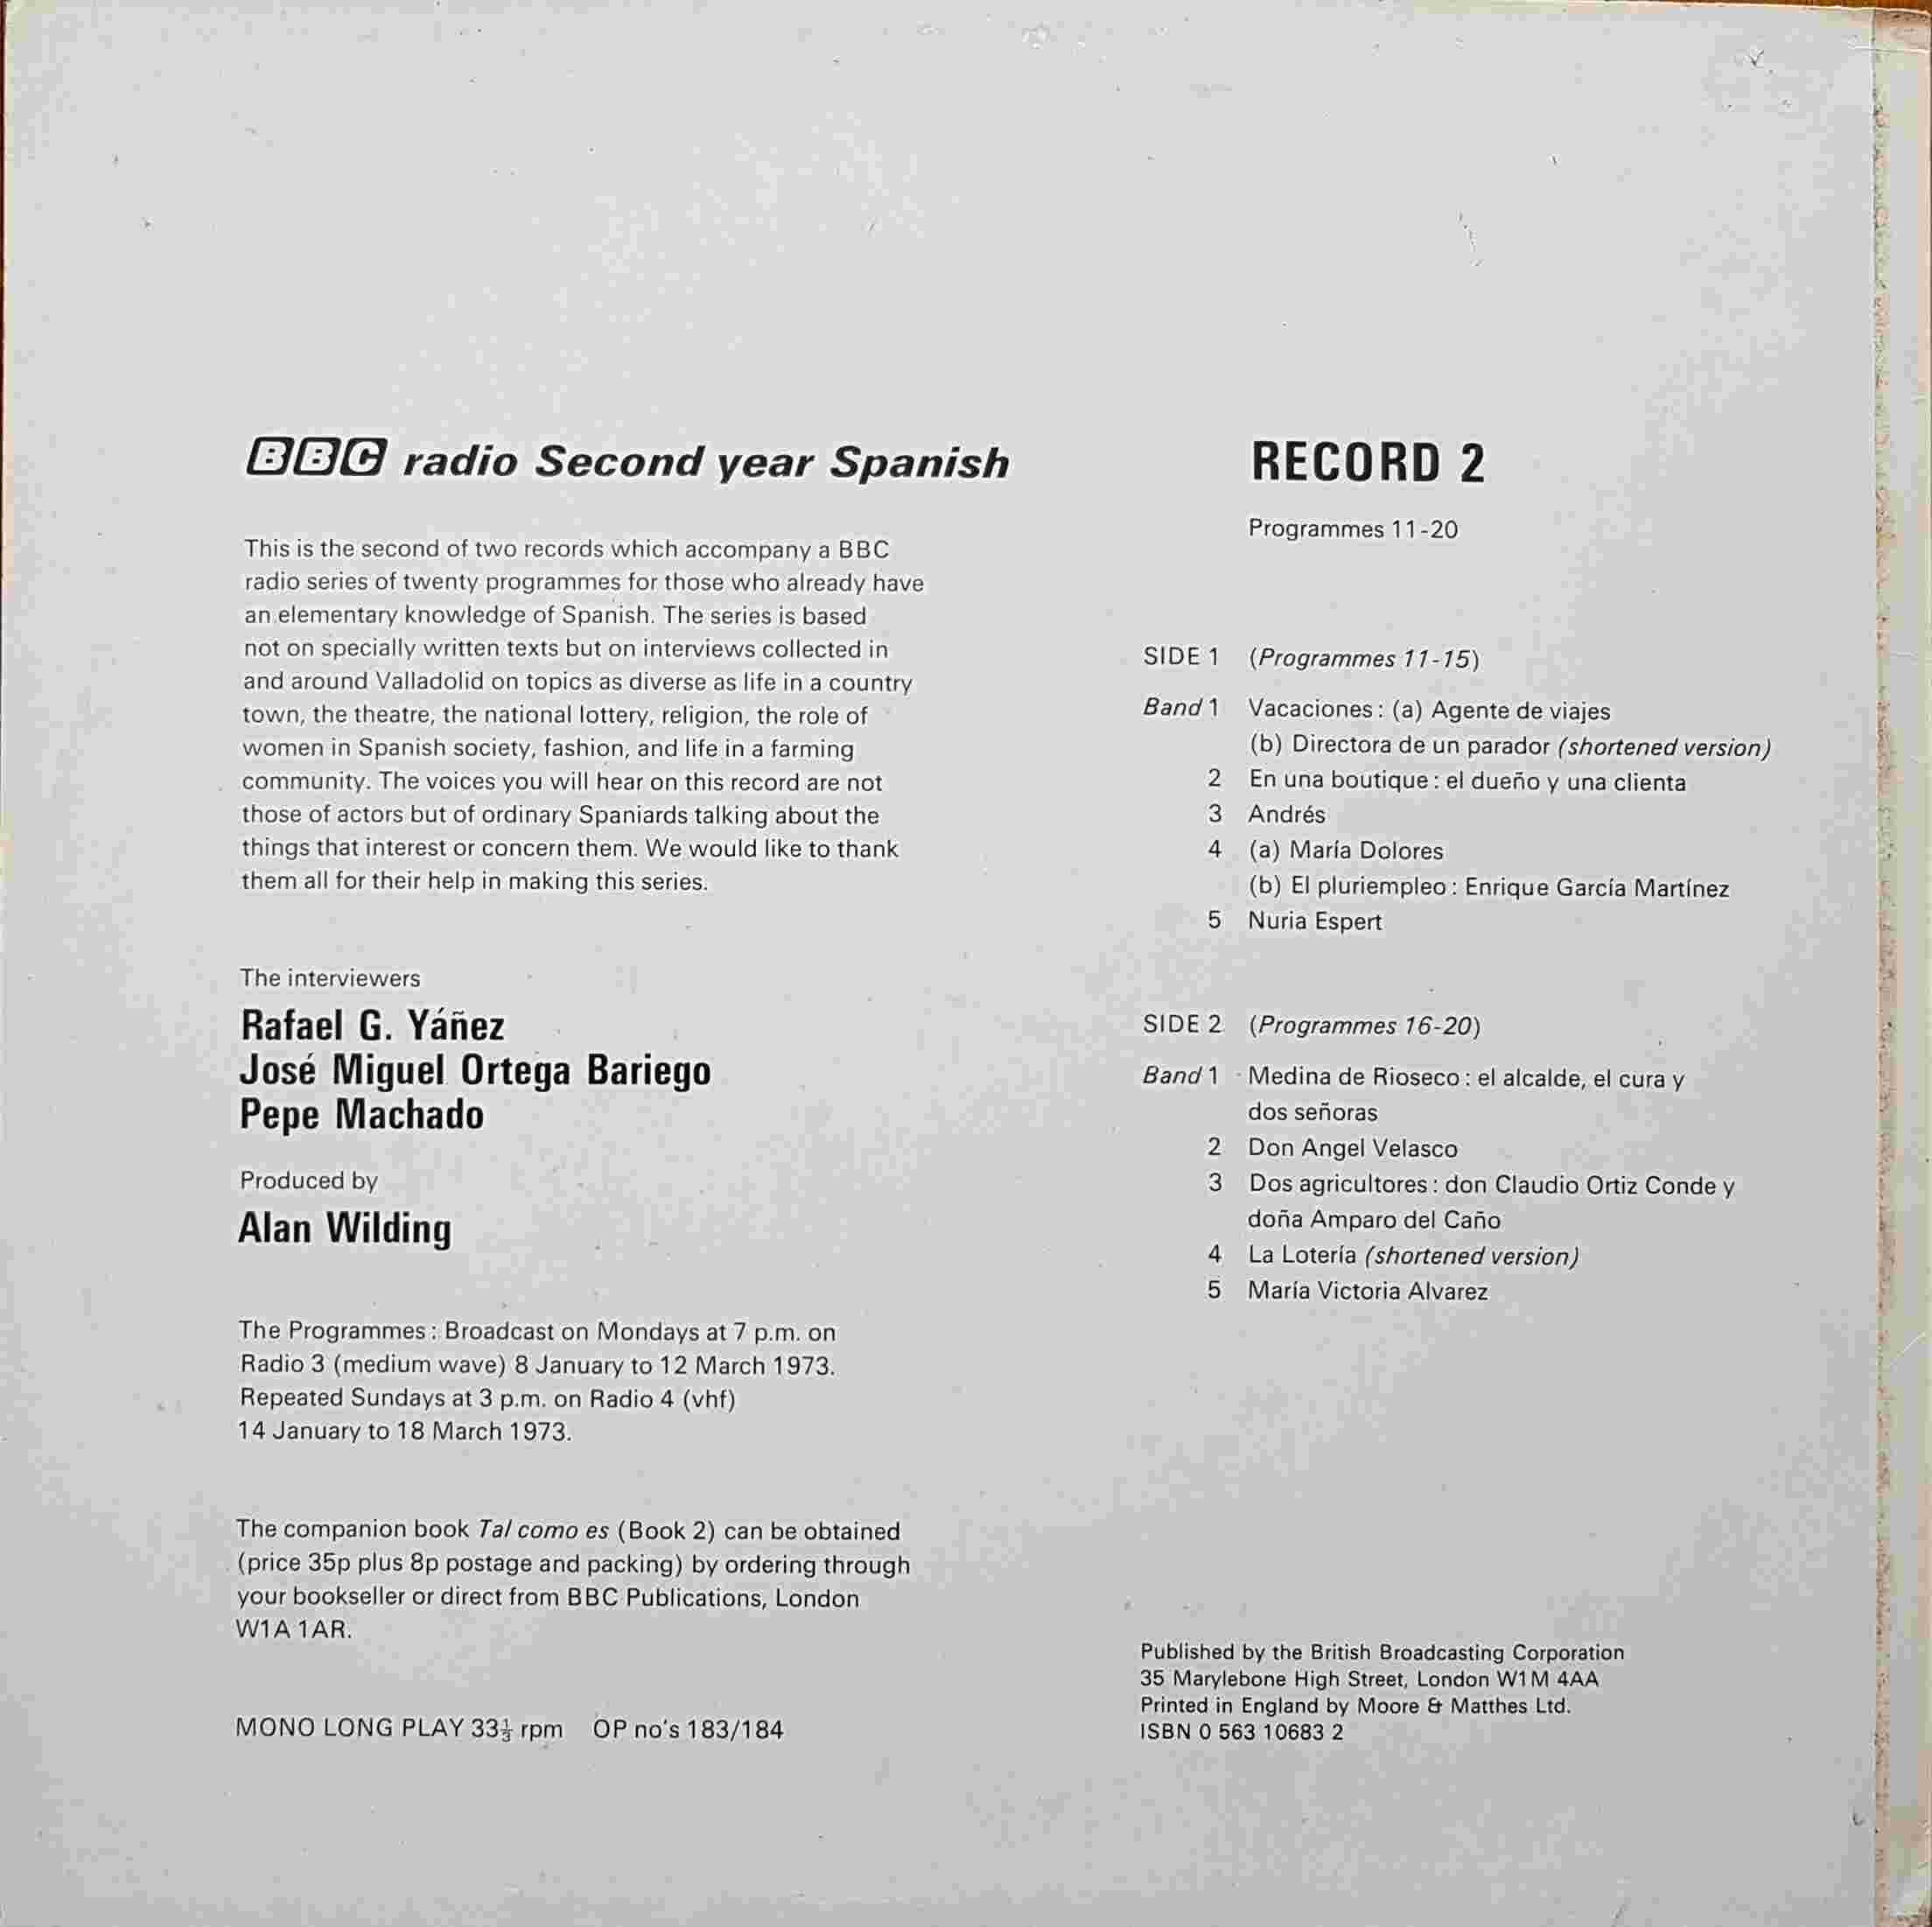 Back cover of OP 183/184